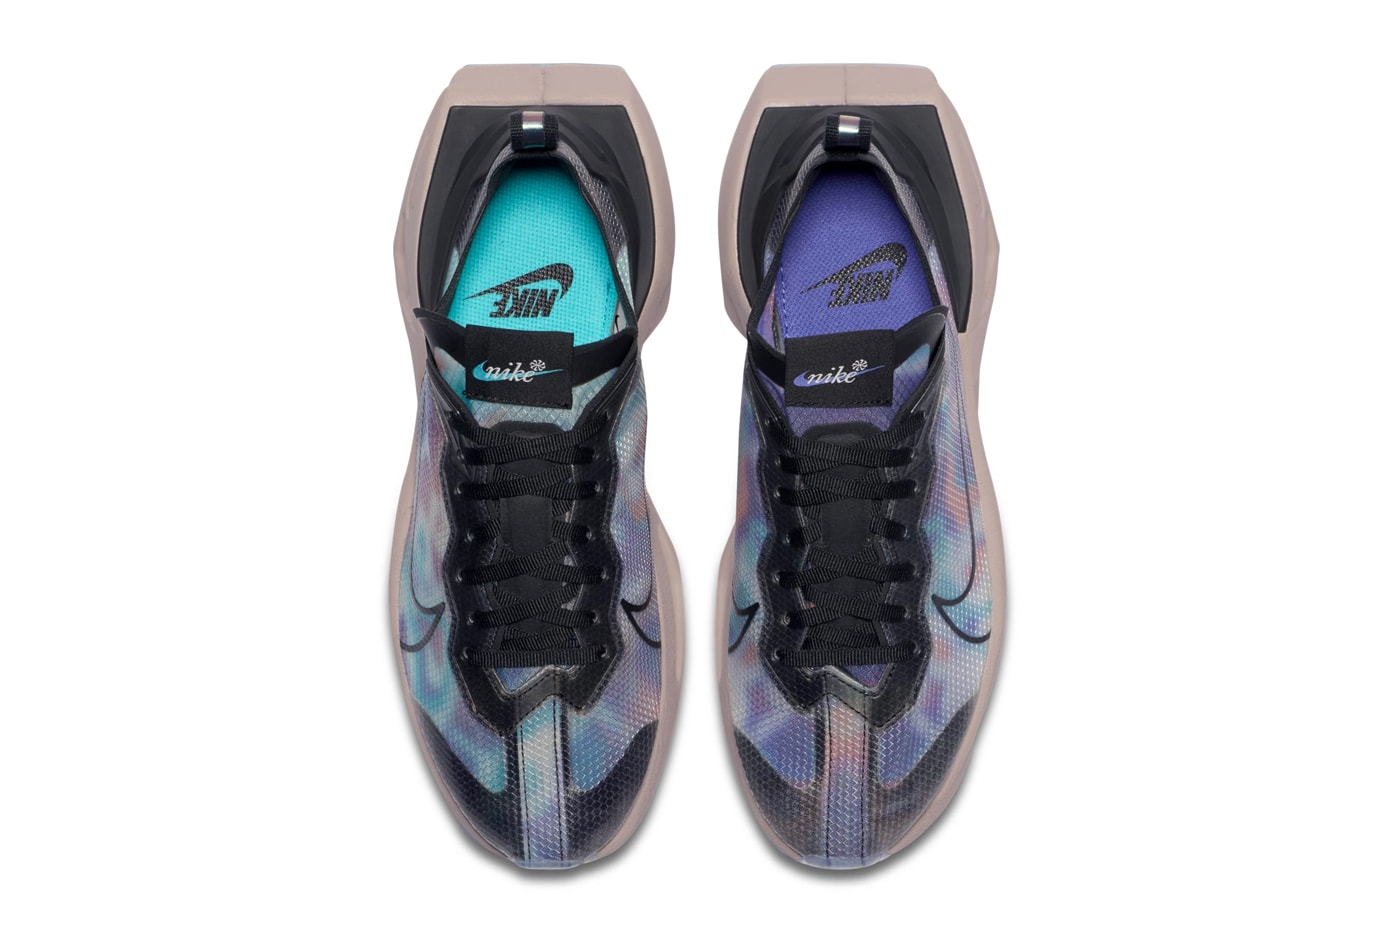 Nike Zoom X Vista Grind Night Aqua shoes sneakers kicks trainers runners spring summer 2020 collection menswear streetwear swoosh footwear chunky technical iridescent reflective